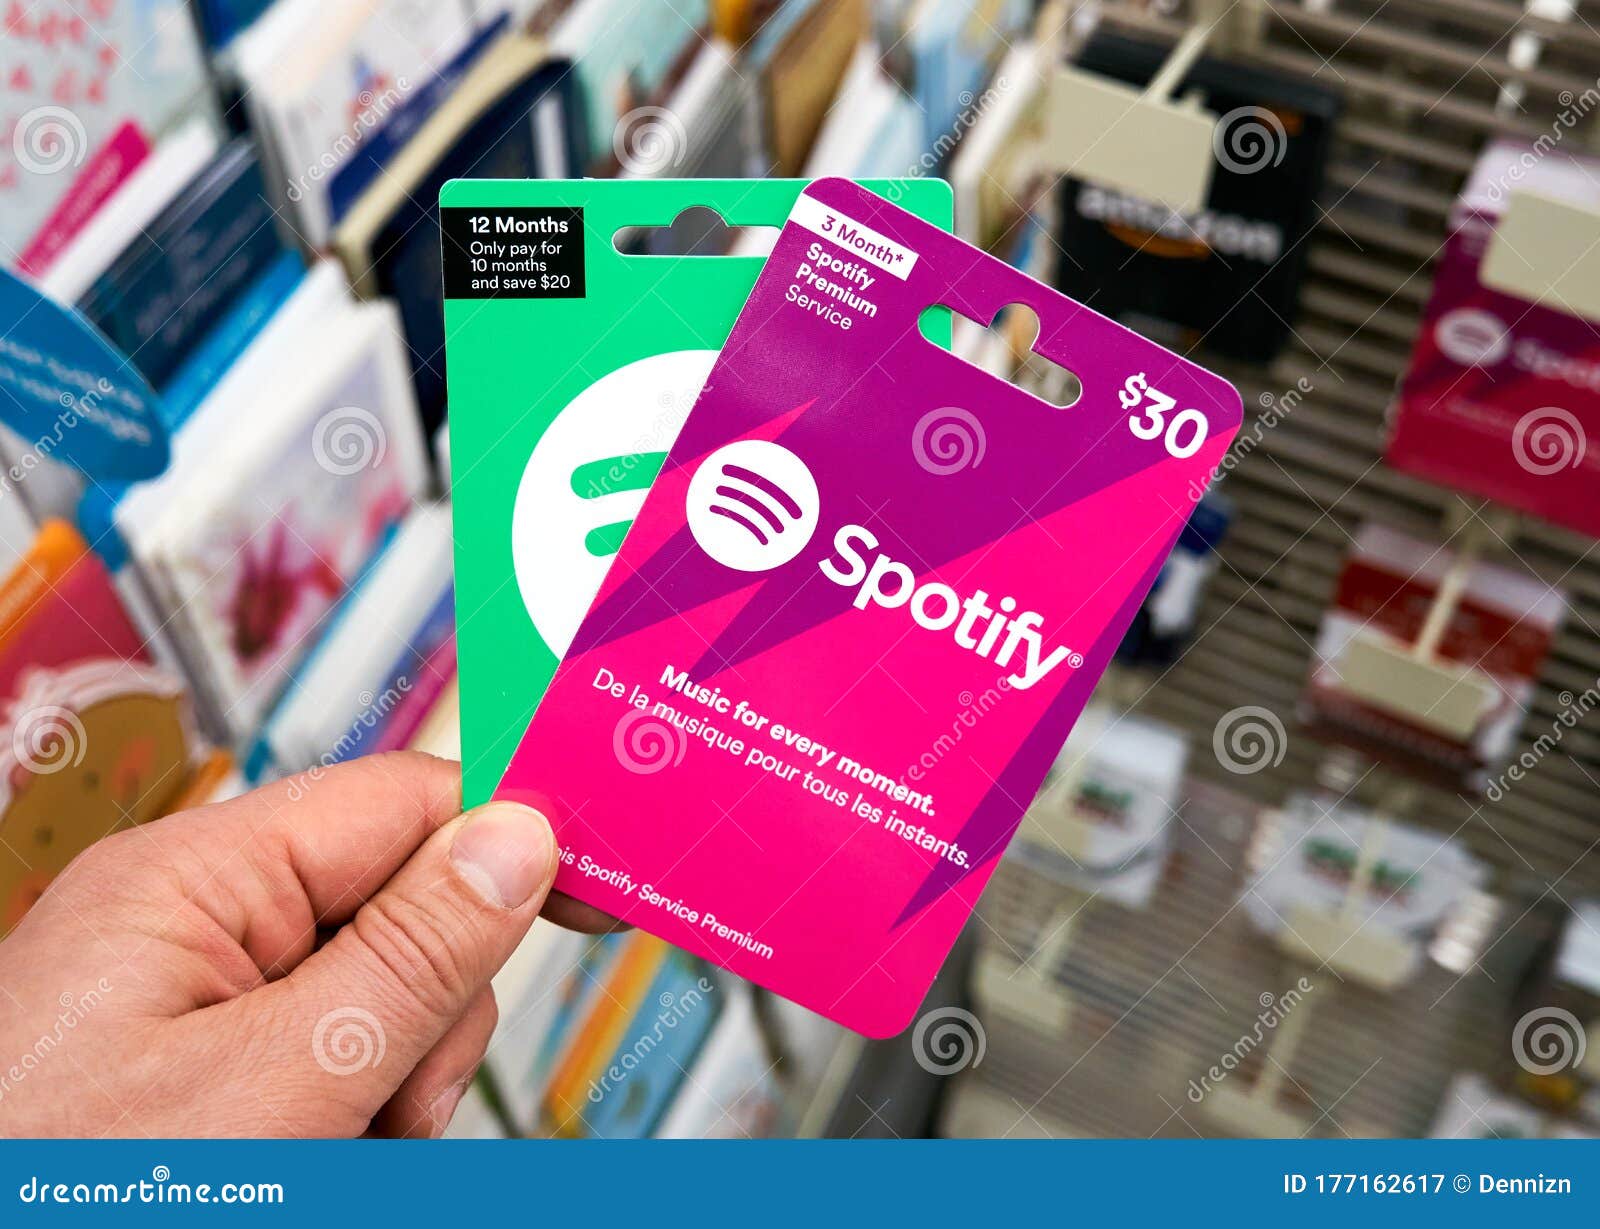 https://thumbs.dreamstime.com/z/spotify-pink-gift-card-premium-subscription-hand-store-over-cards-montreal-canada-march-international-media-177162617.jpg